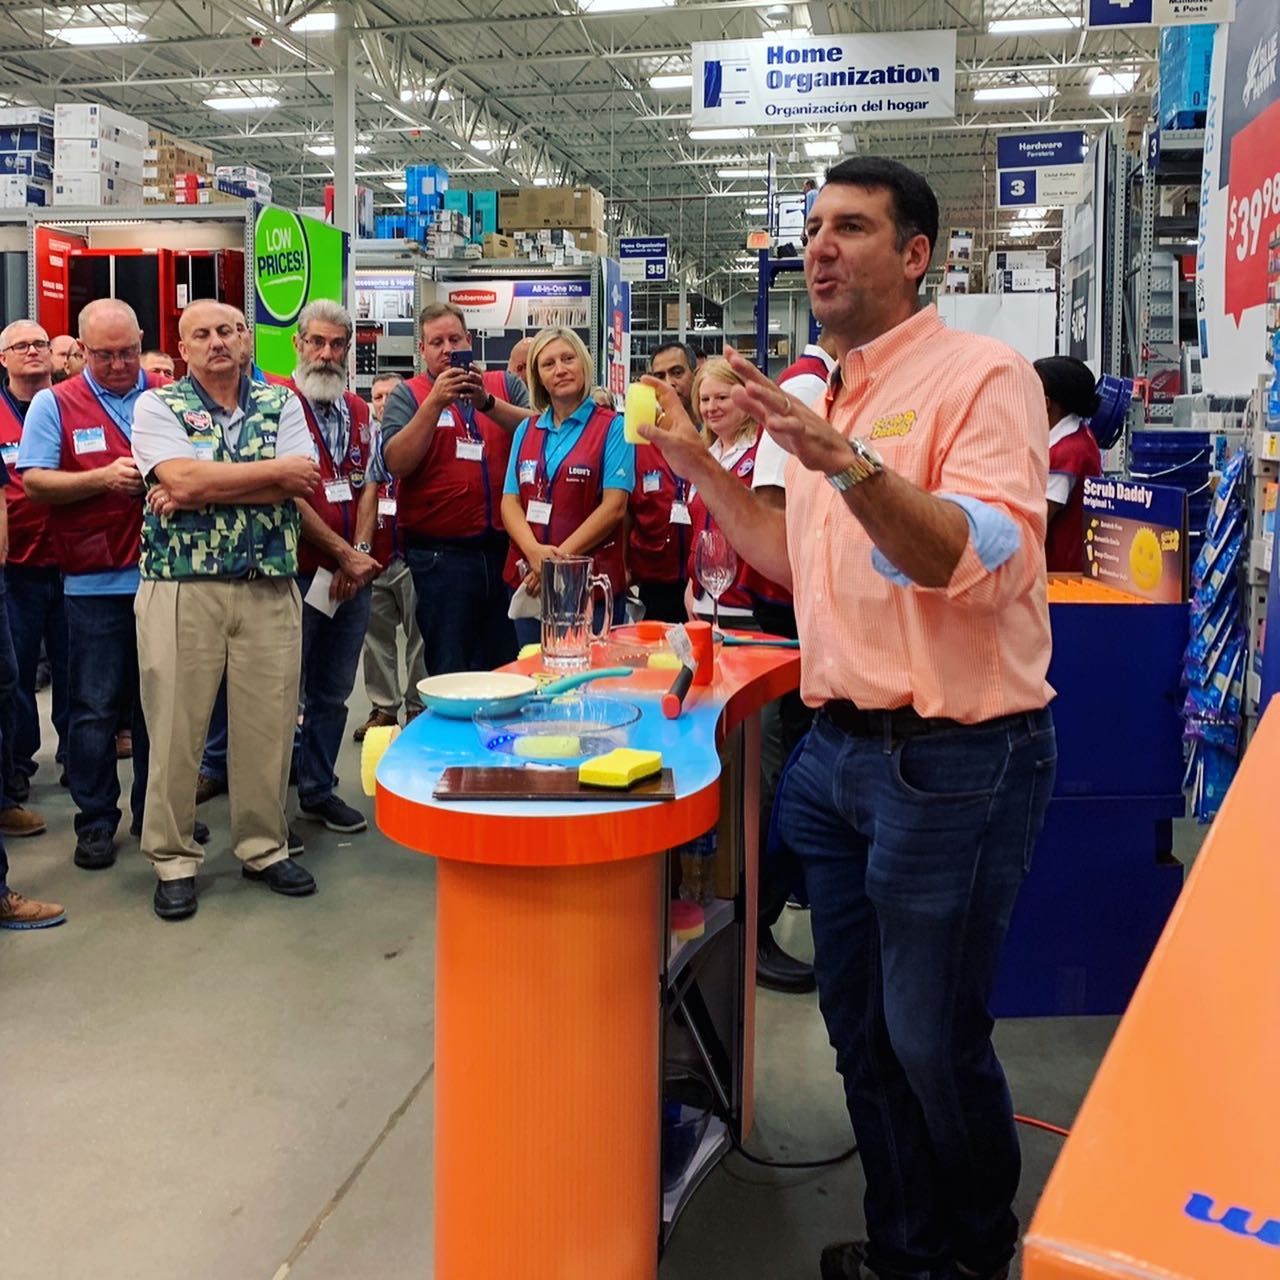 Scrub Daddy exec talks about product with store staff.